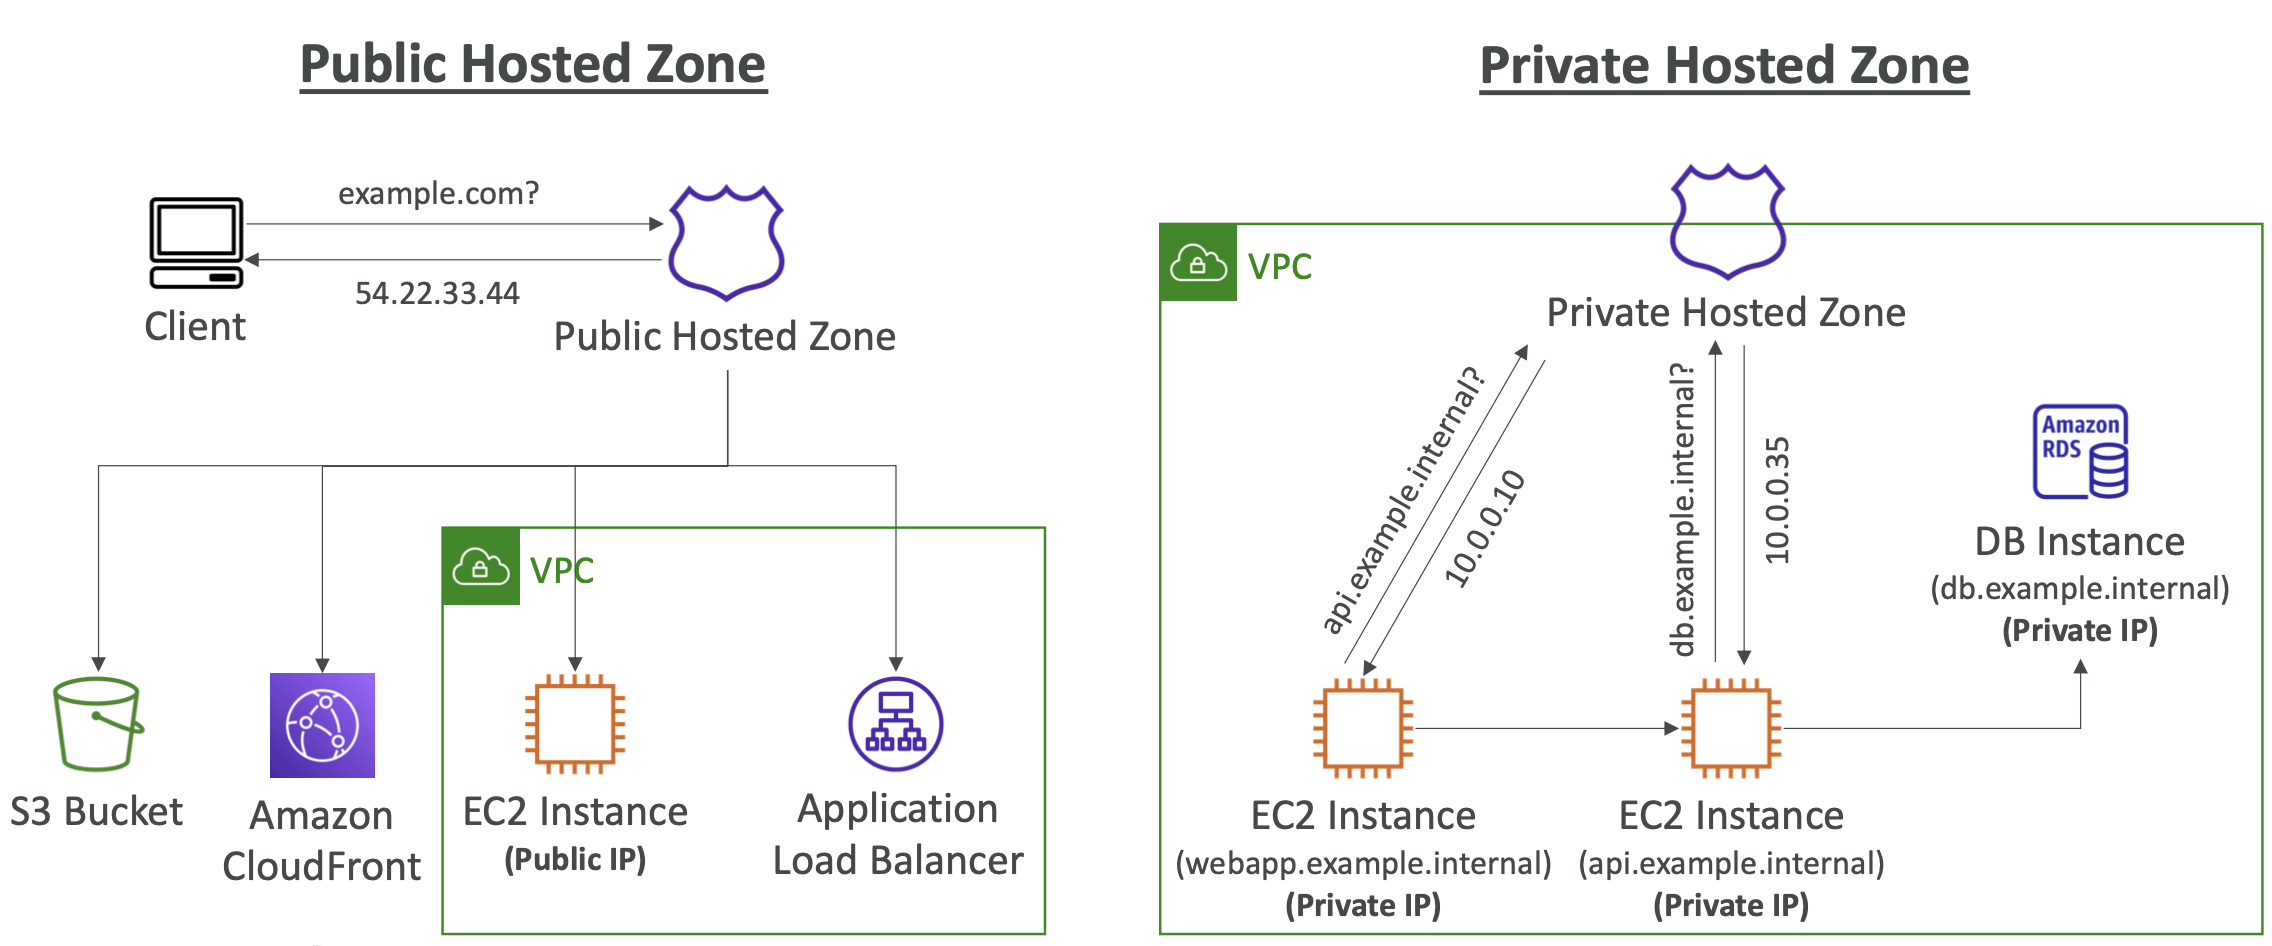 Hosted Zones